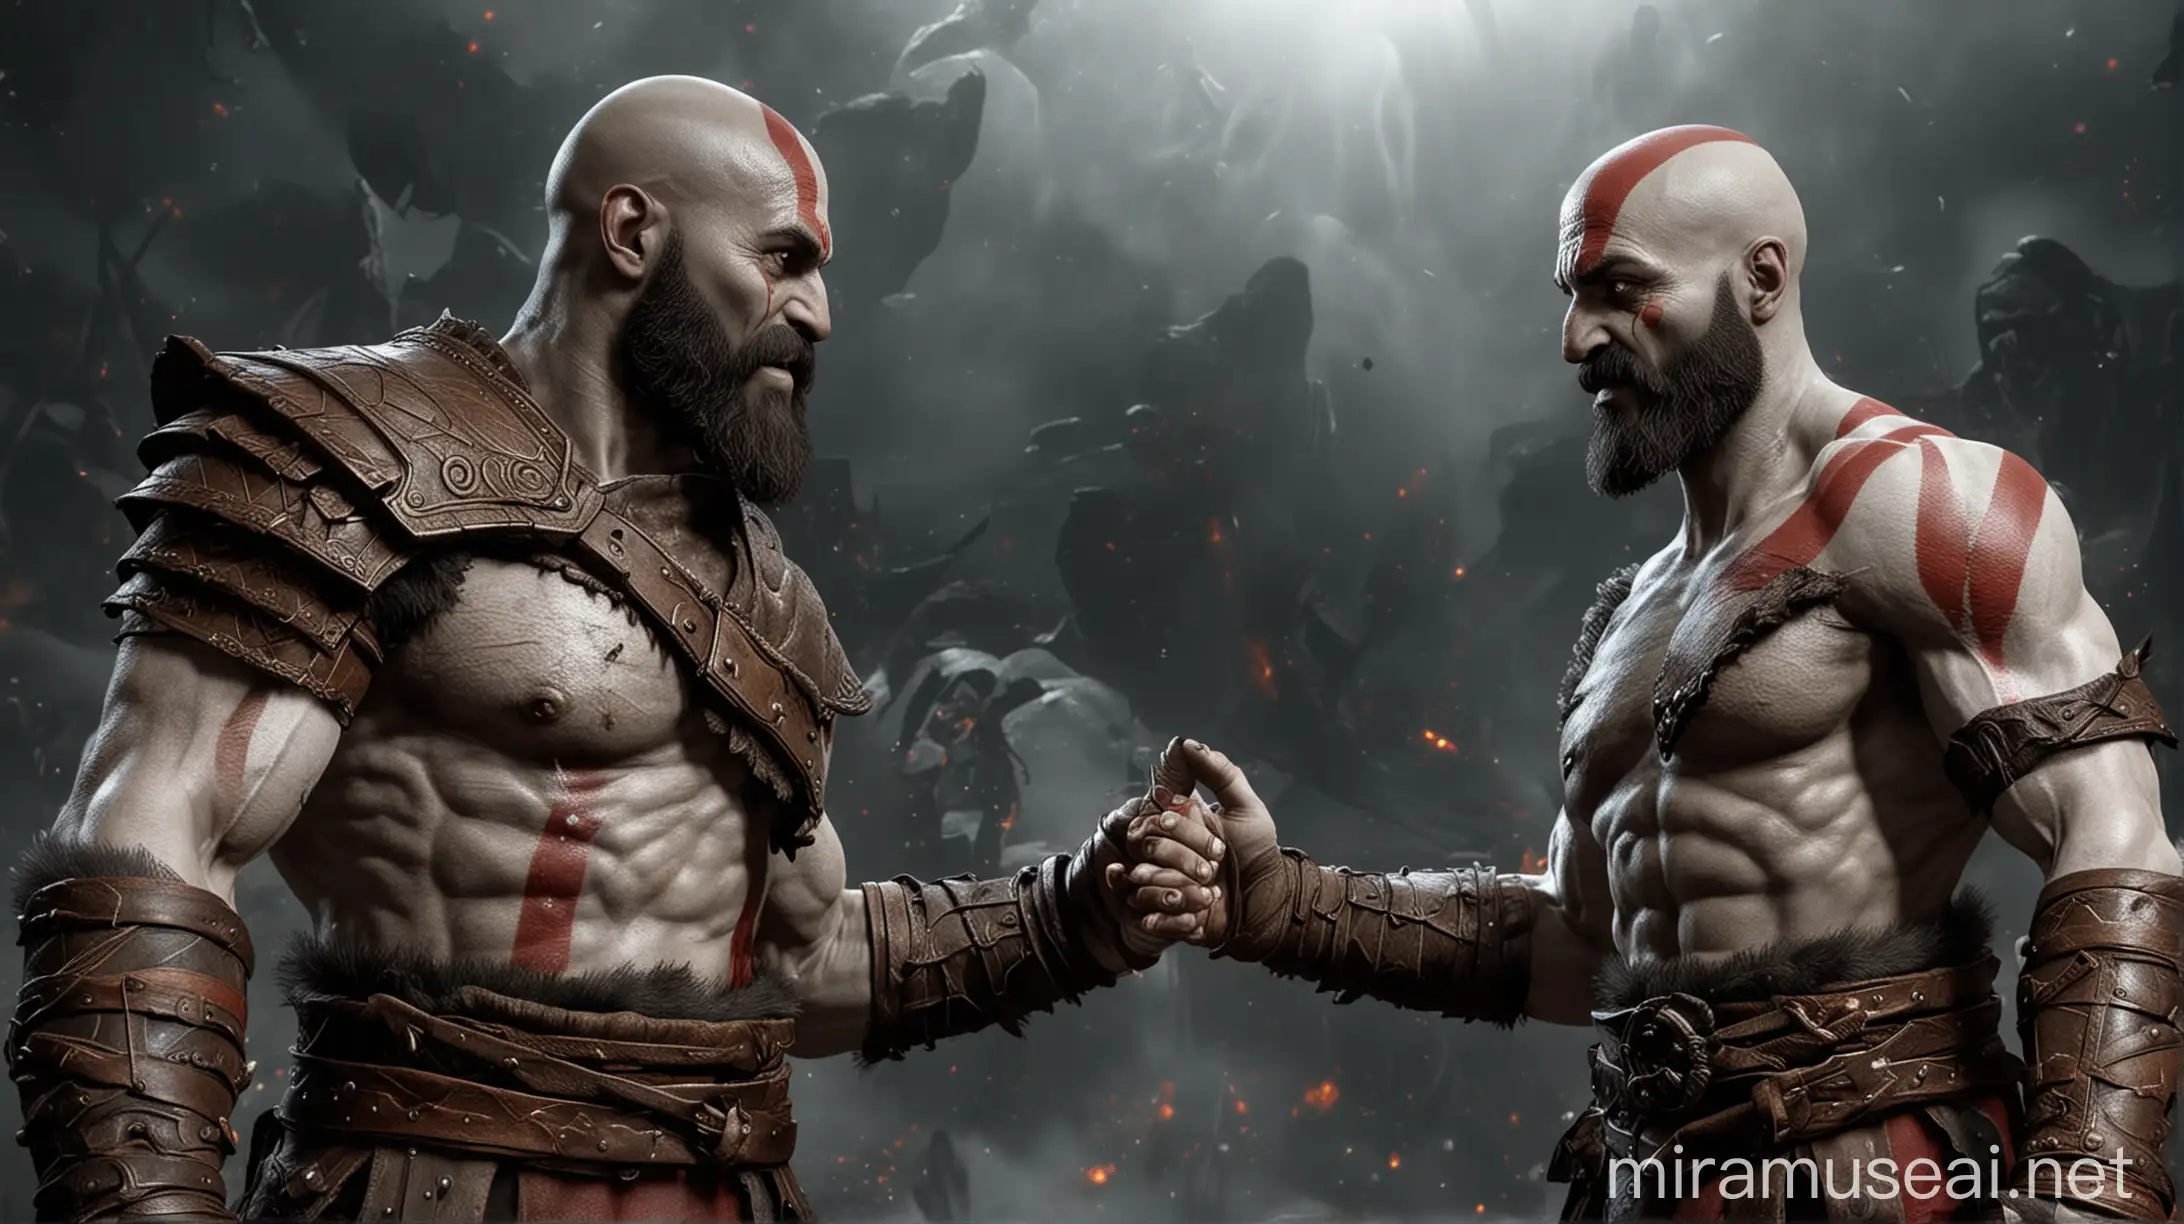 generate kratos from god of war who is wear  black formally costume who is shaking hand . generate kratos from god of make him rotate to the right.